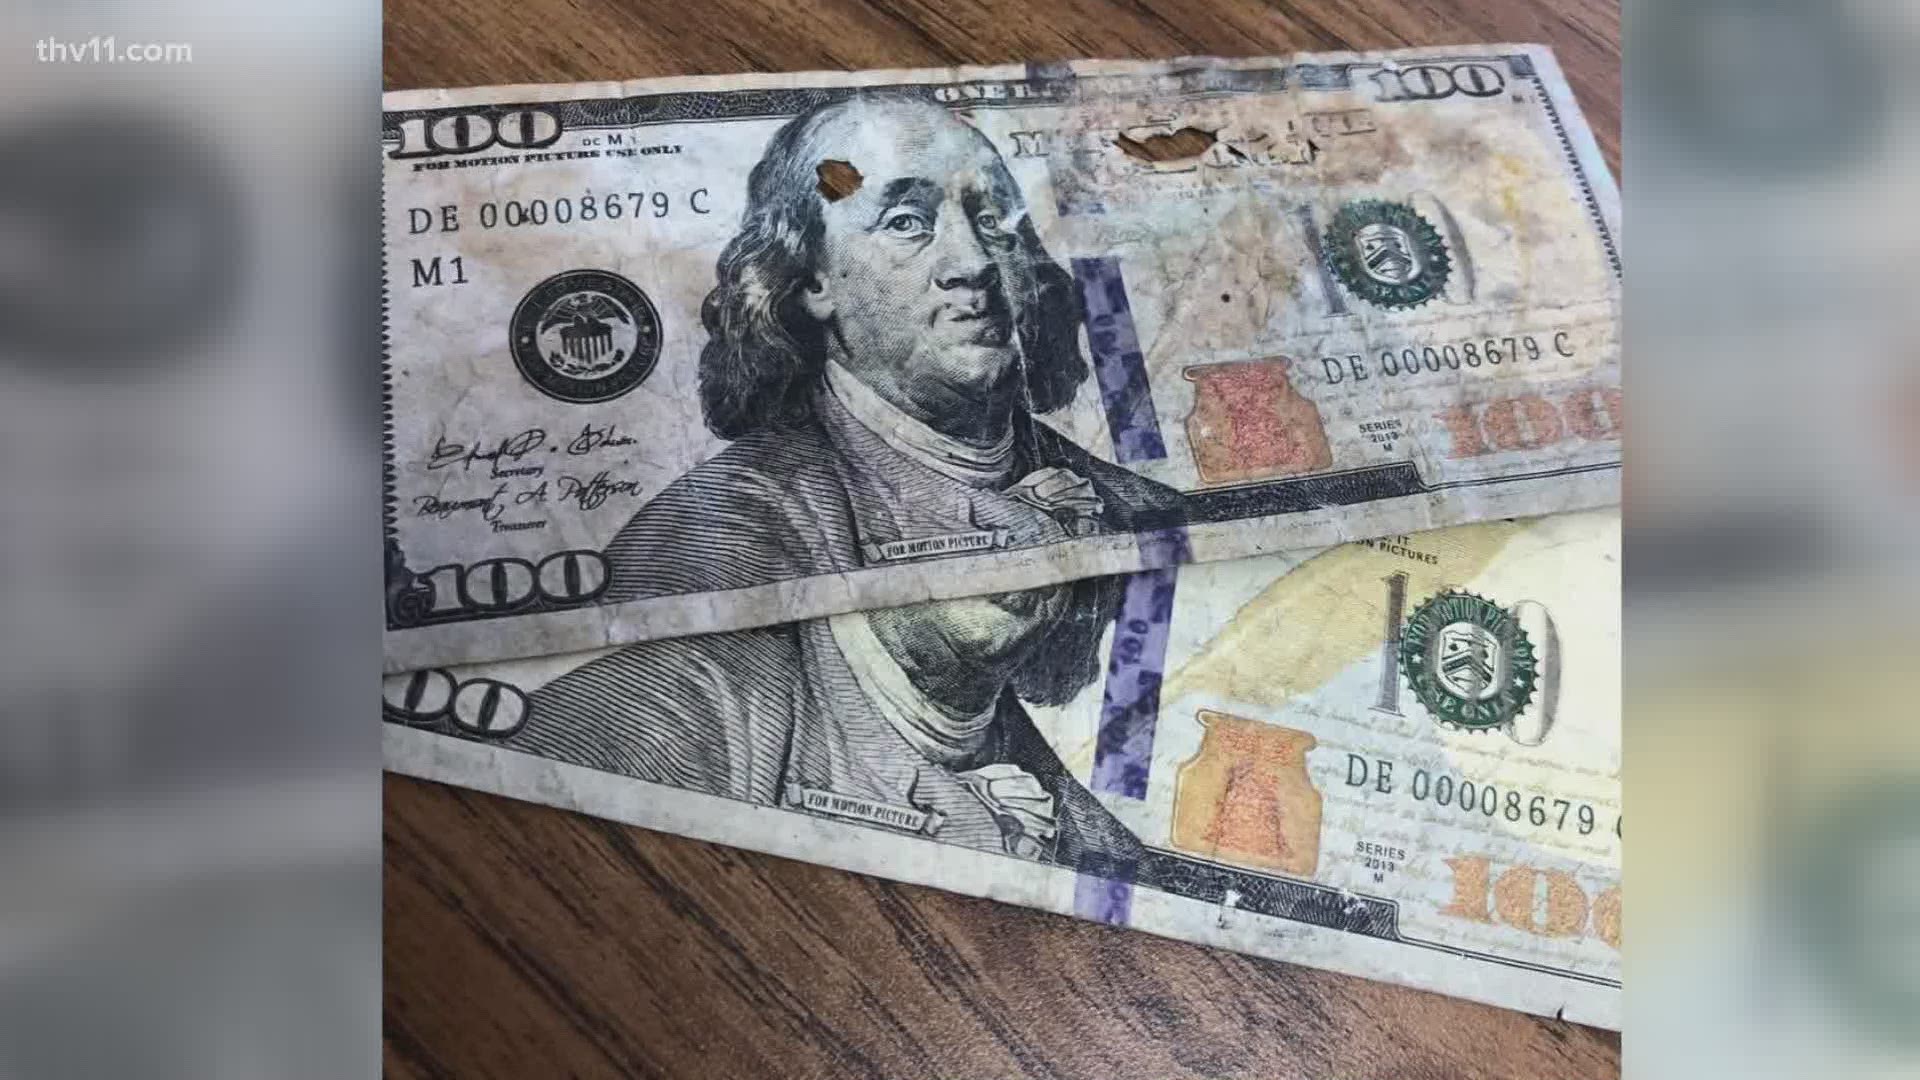 Police in Malvern, Ark. are warning local business owners about fake money circulating around town.